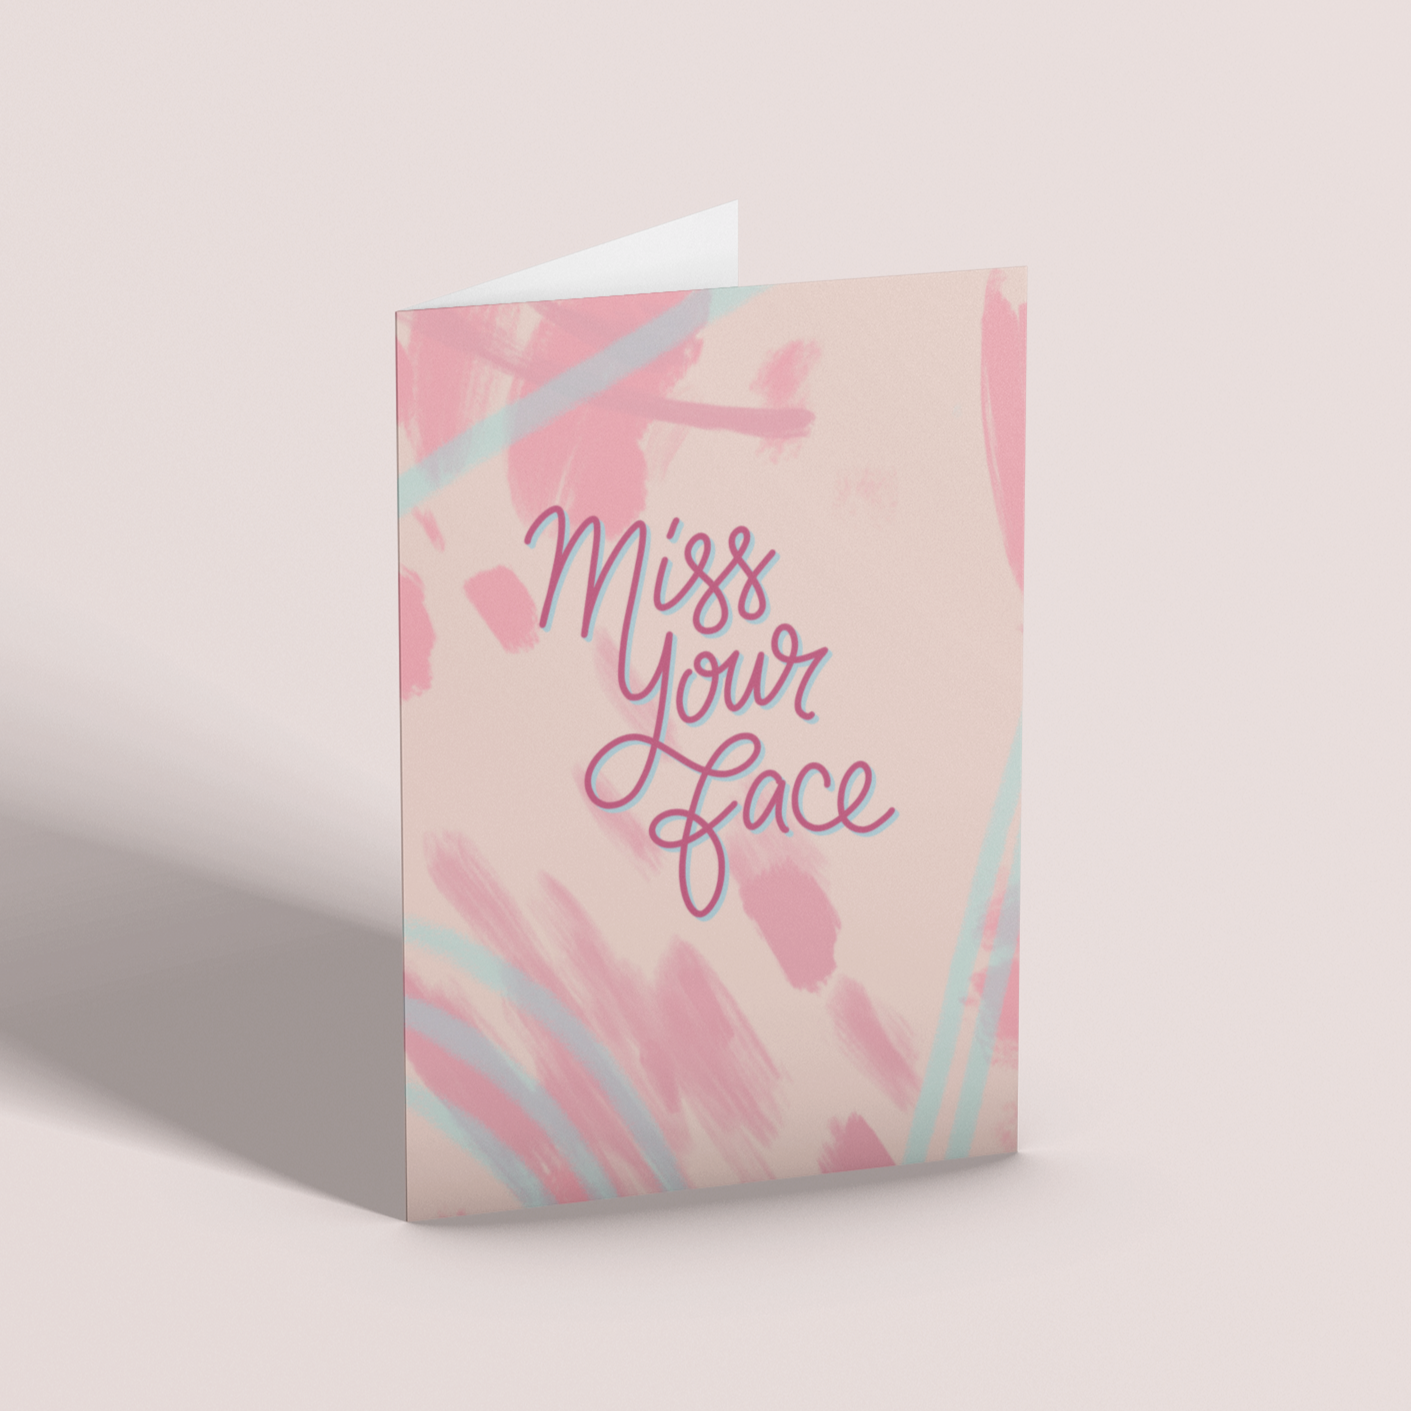 MISS YOUR FACE - Greetings Card by MarcoLooks